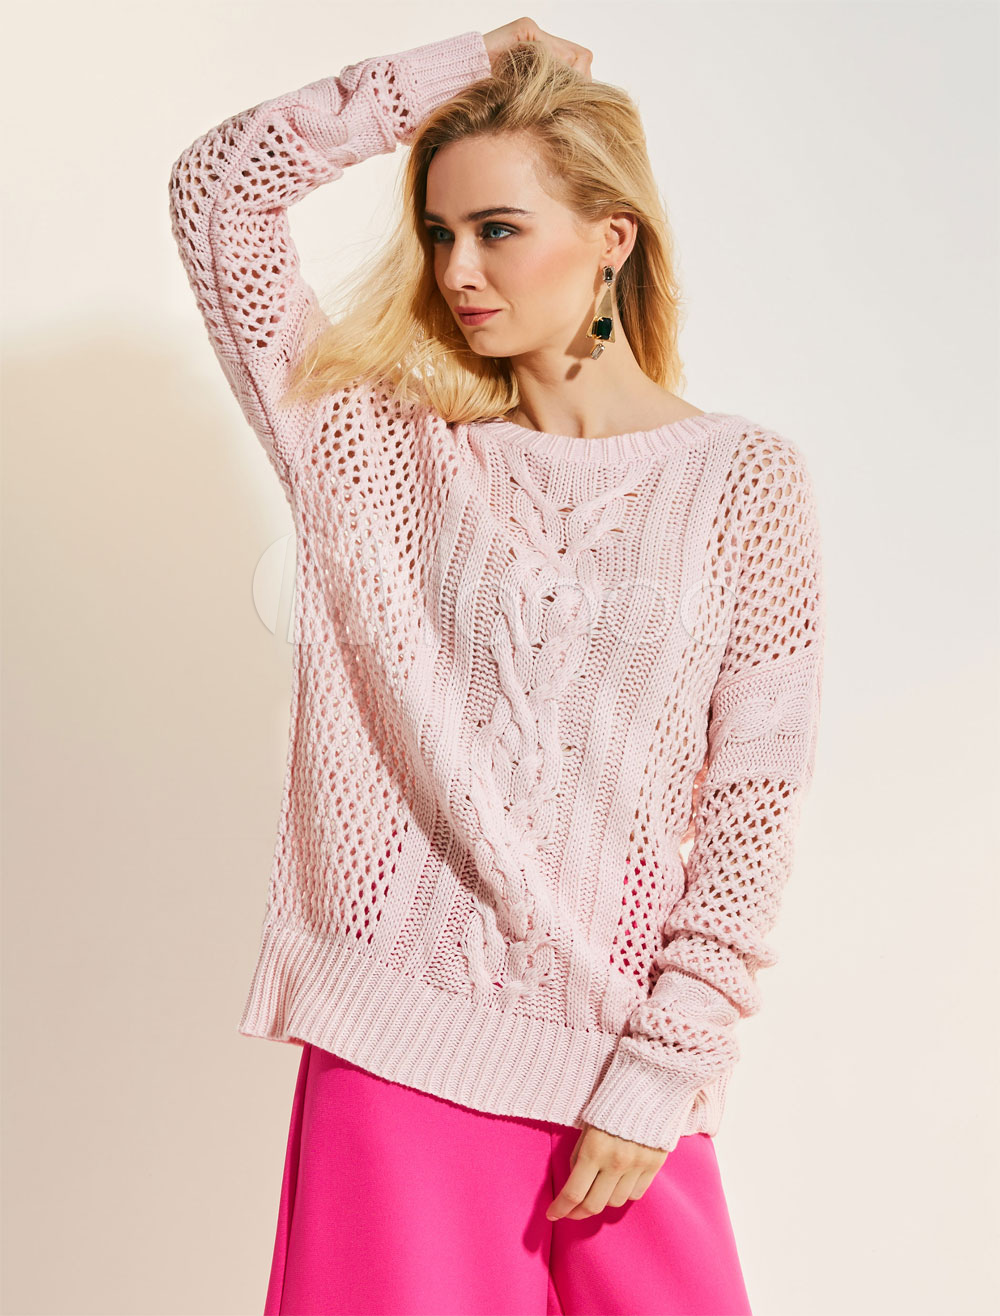 Women Wool Sweater Pink Round Neck Long Sleeve Cut Out Knit Top ...